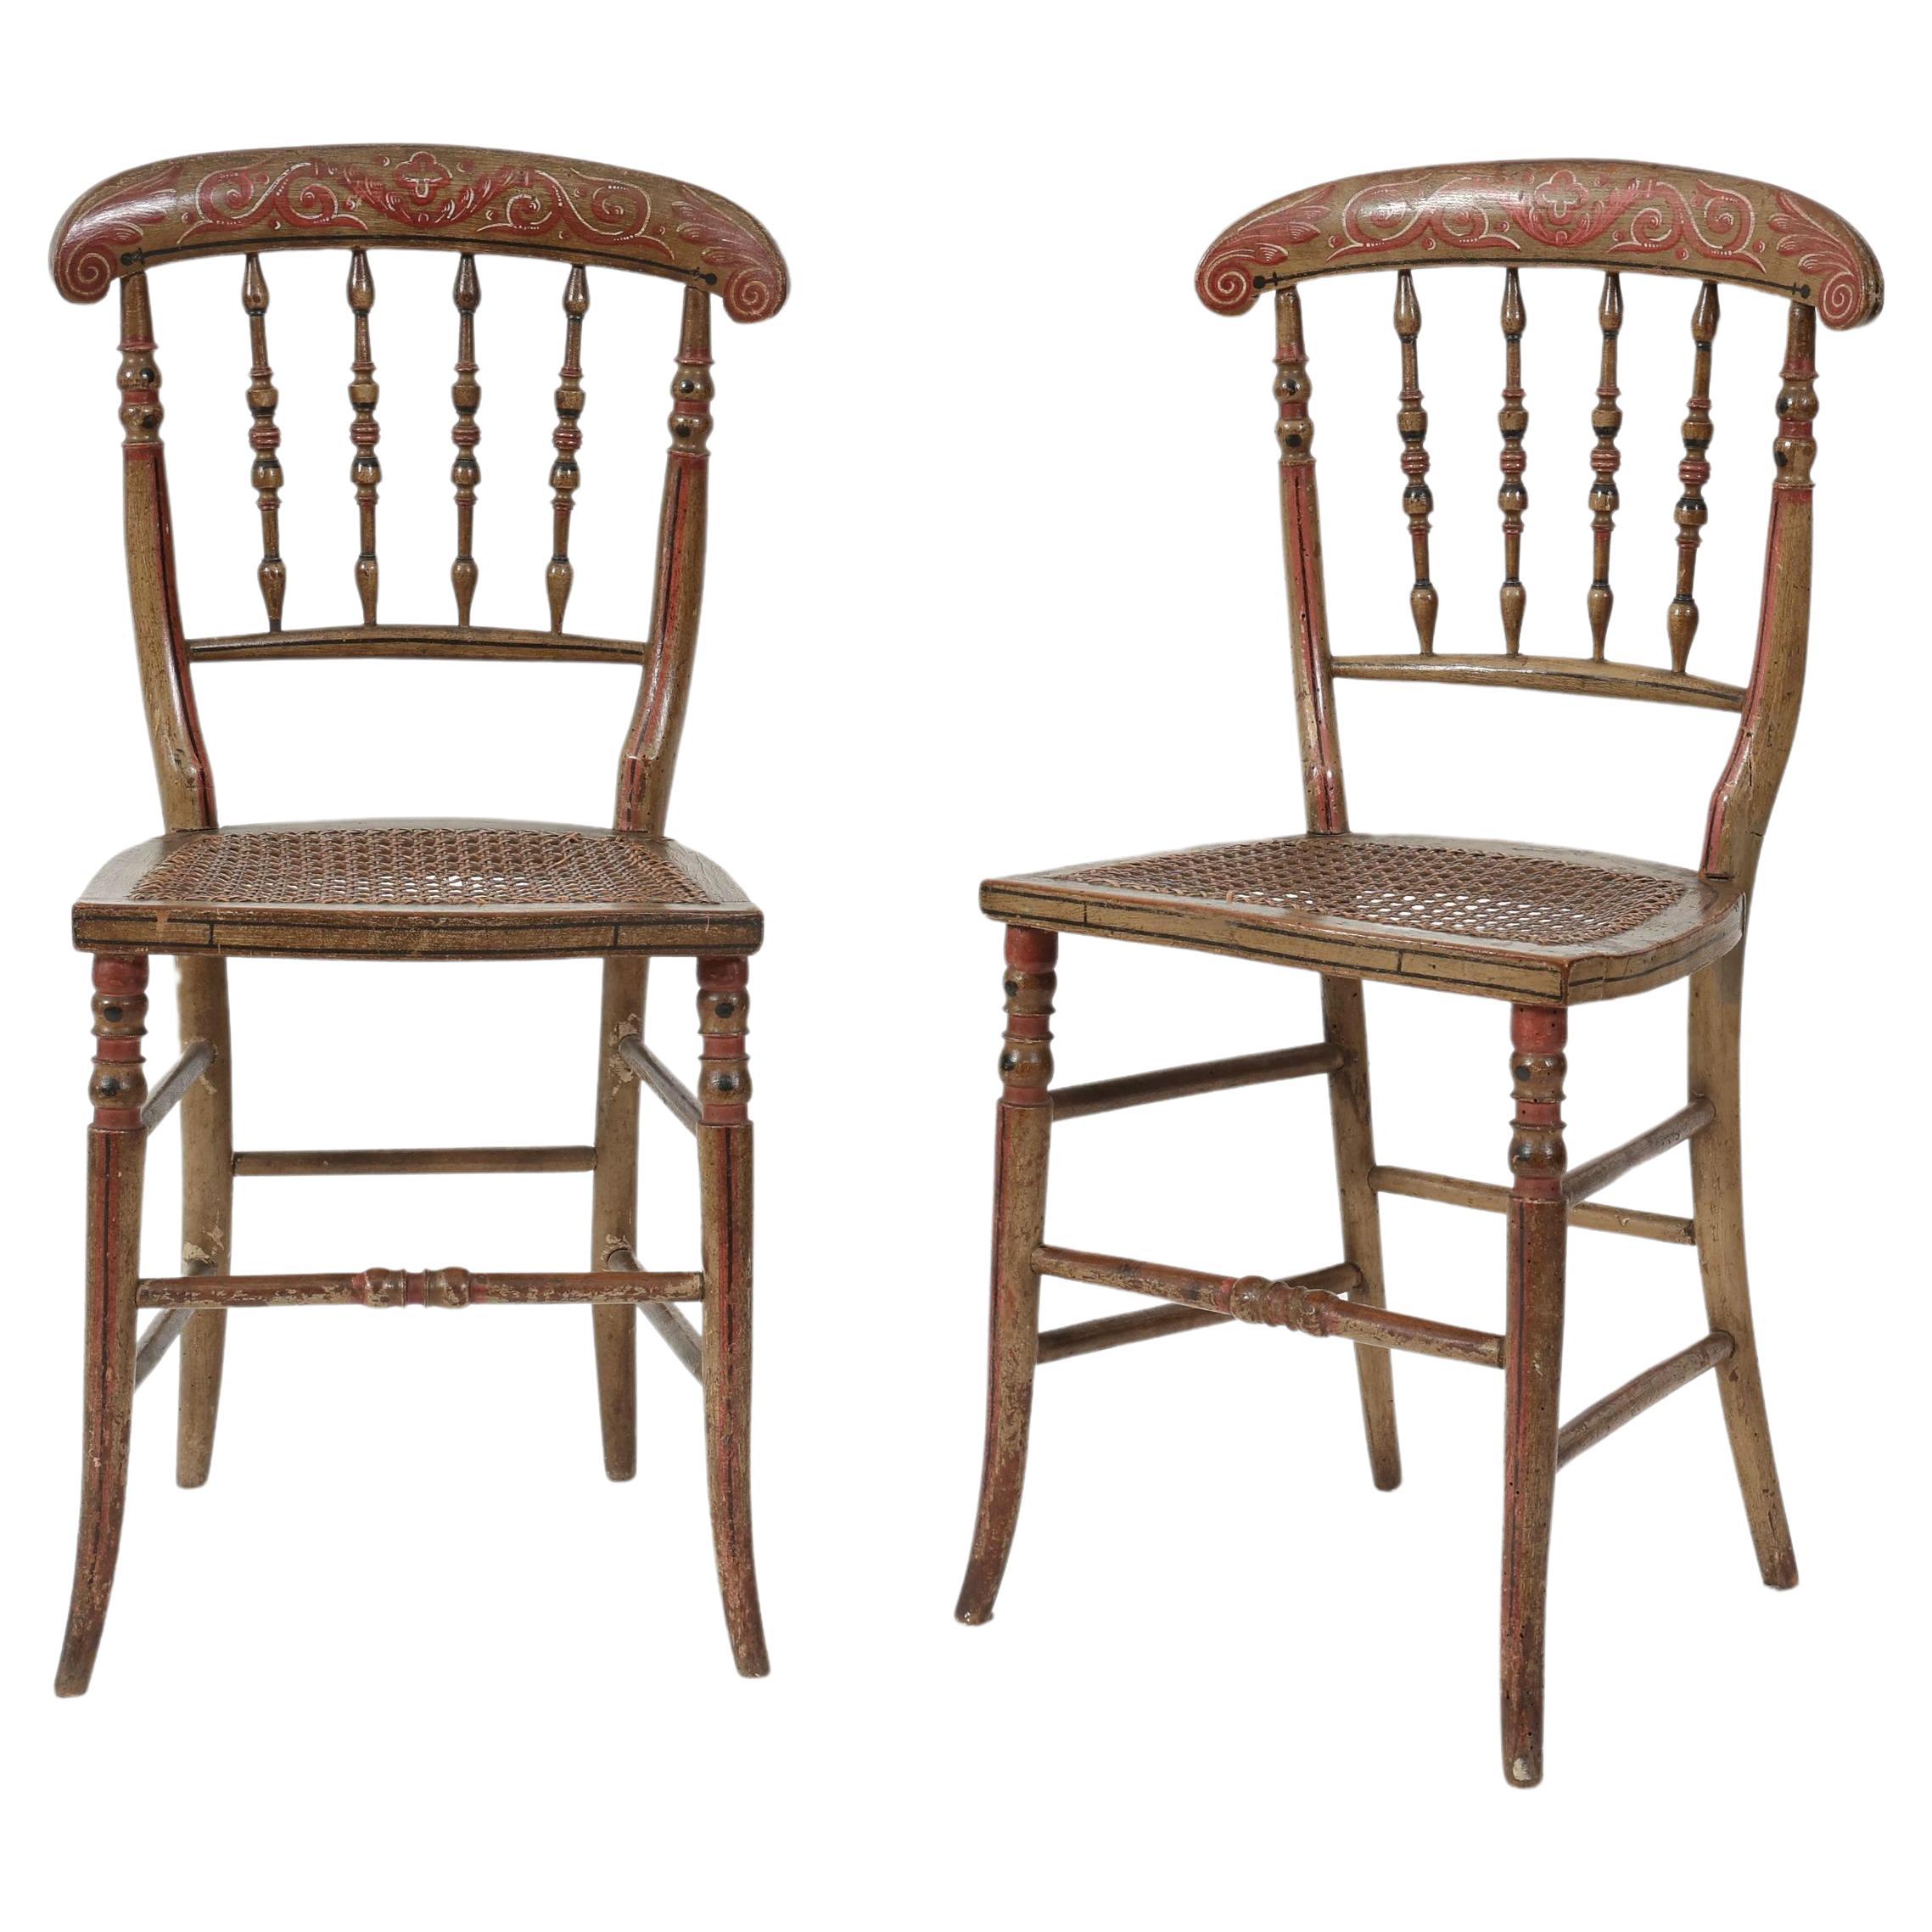 Pair of Painted Woodwork Chairs - XIX Century - Europe For Sale